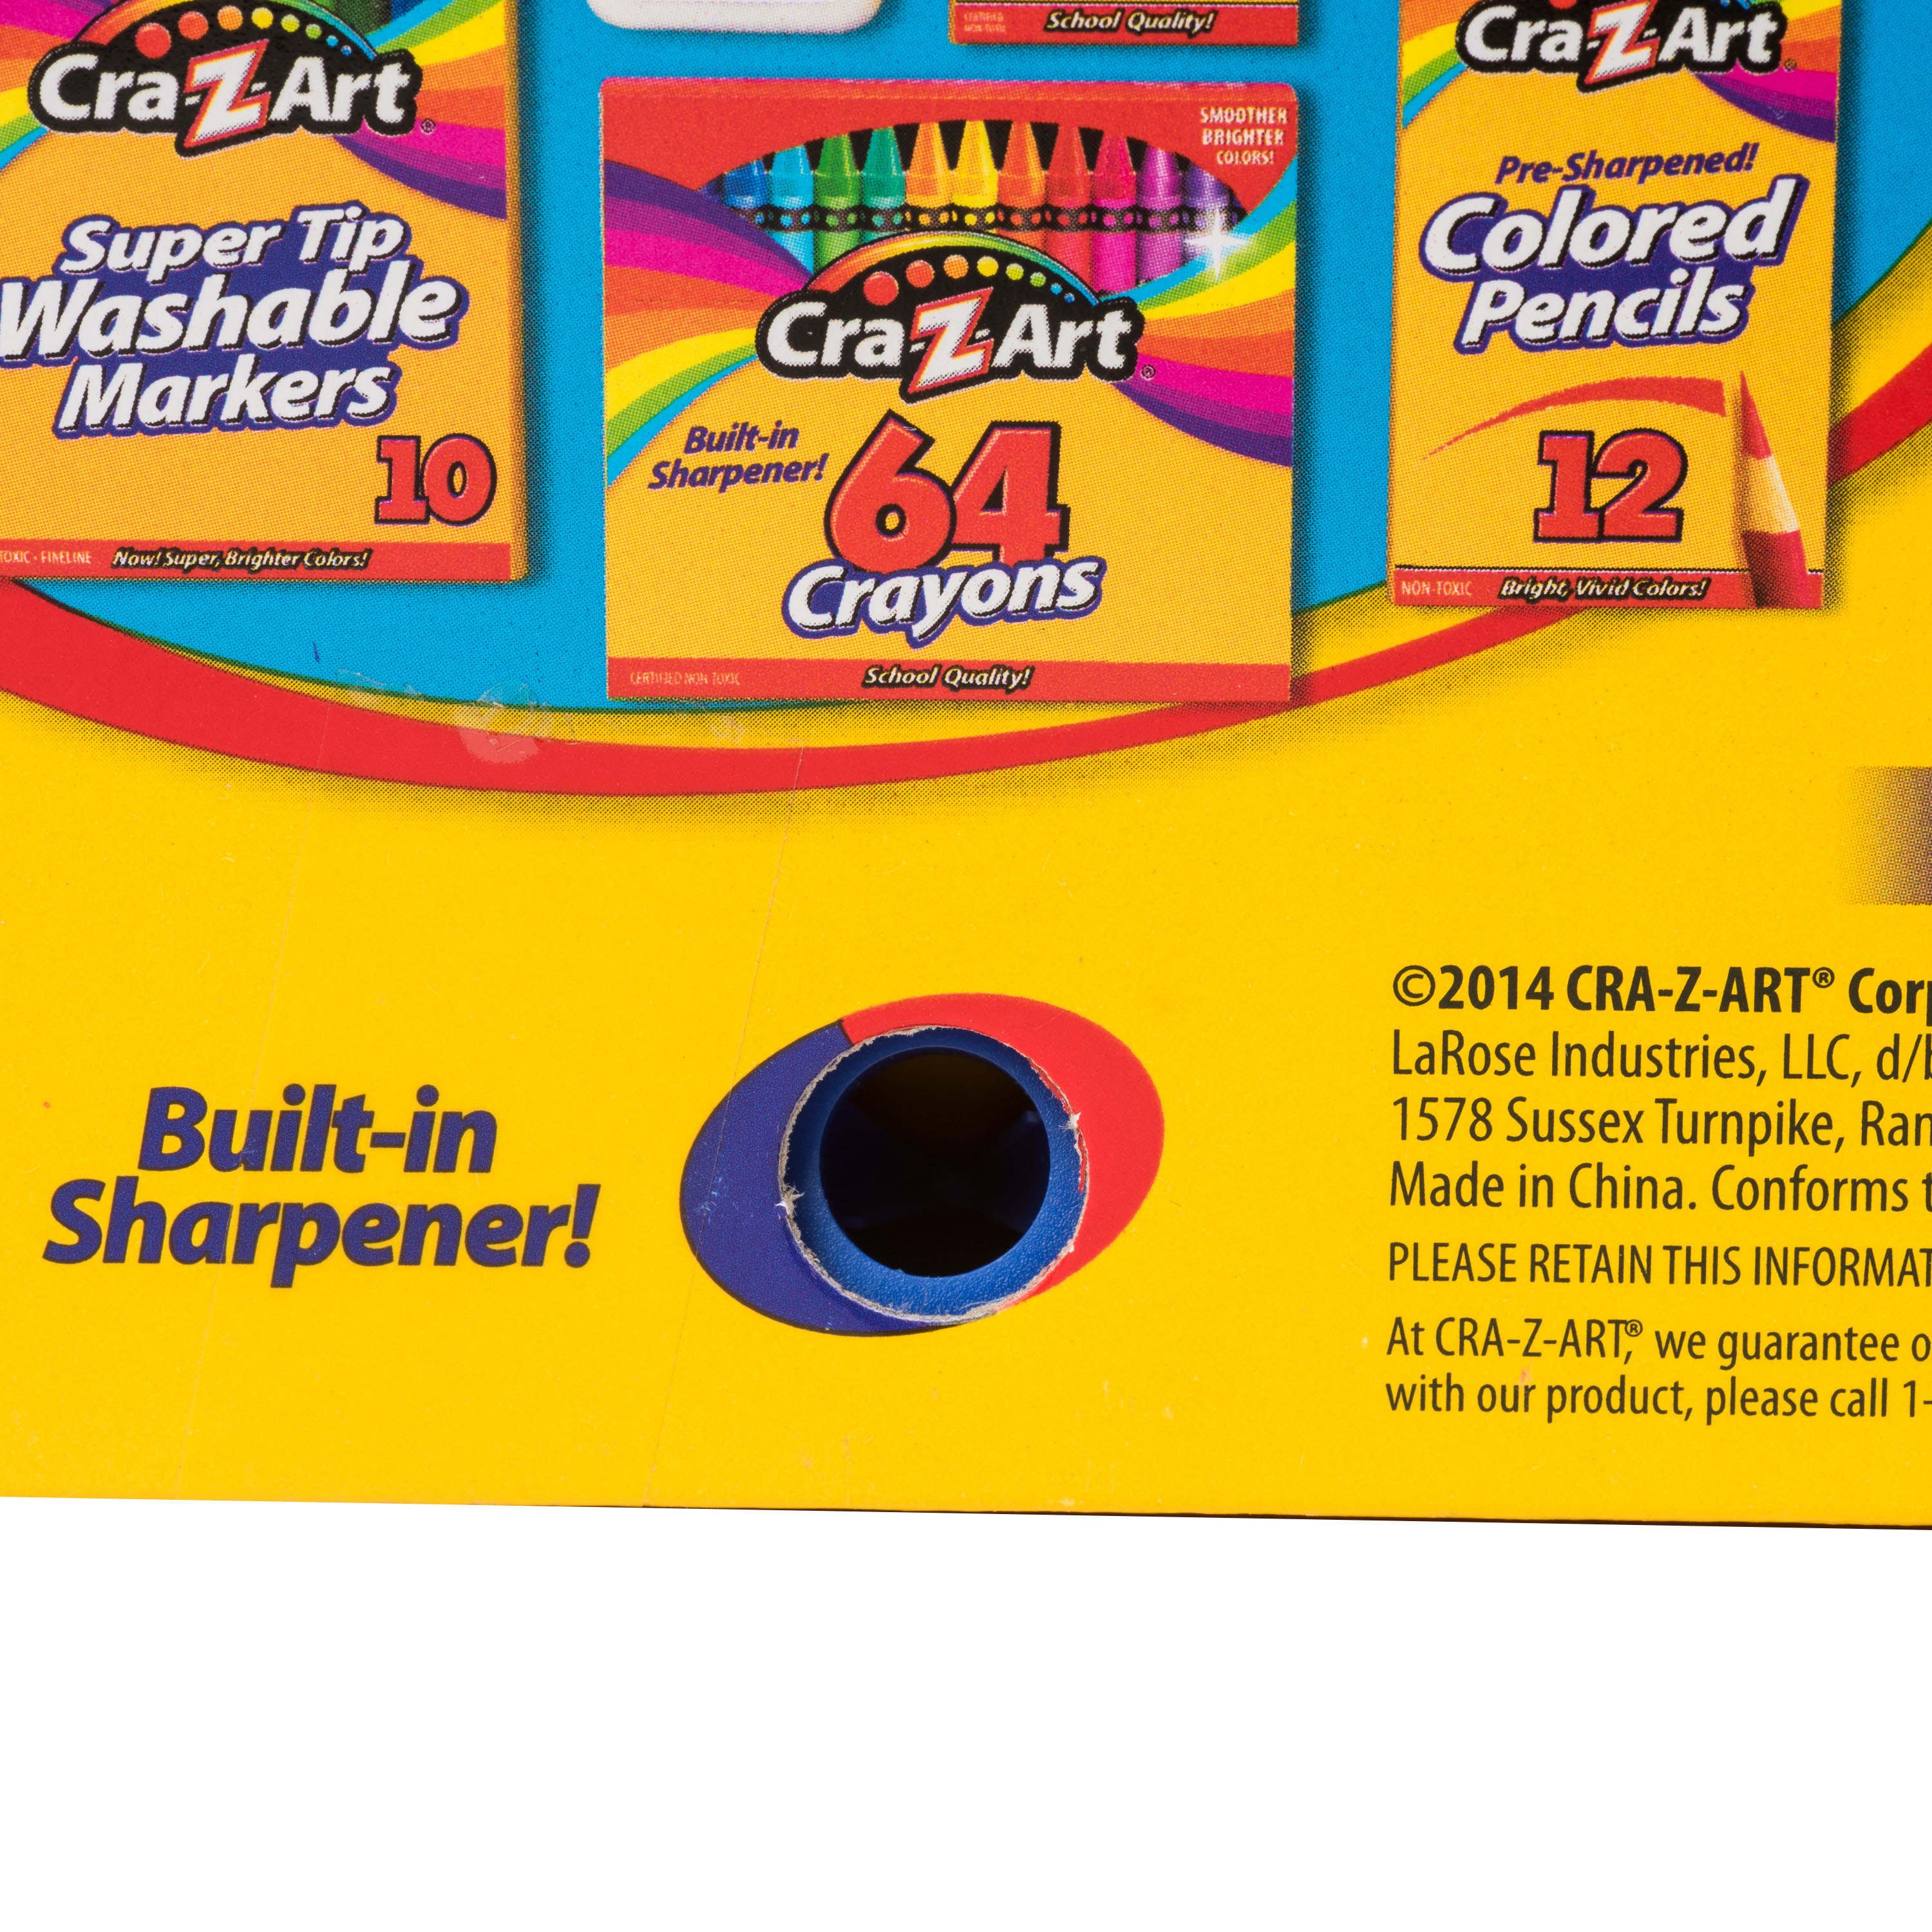 Cra-Z-Art Classic Crayons Multicolor Bulk Pack, 64 Count, Built-in Sharpener, Back to School - image 5 of 9